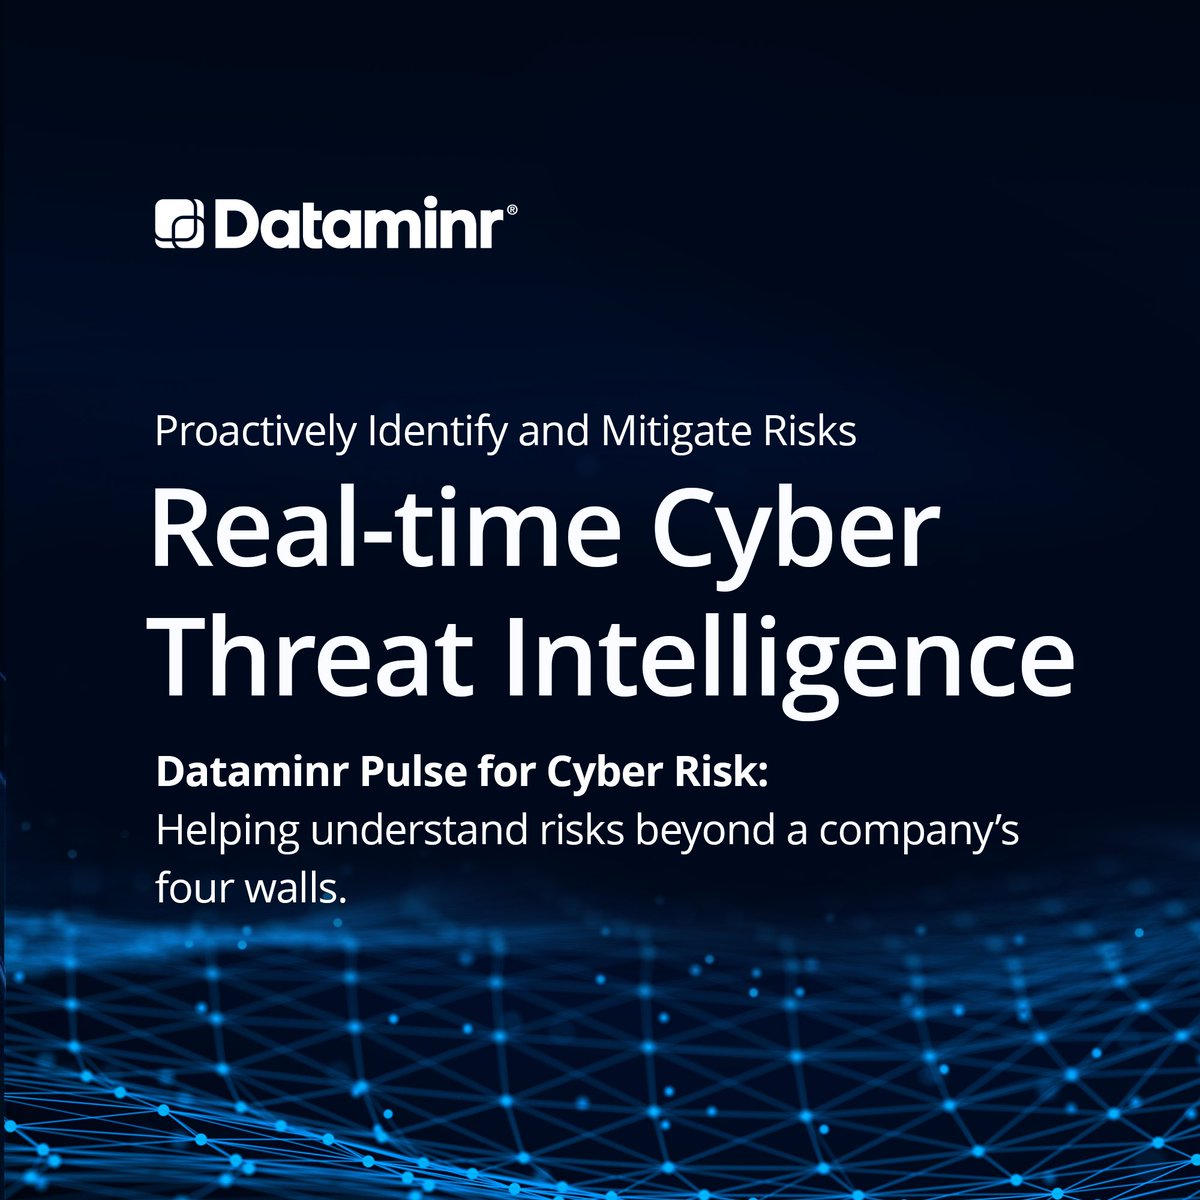 Threat actors and cyber criminals continue to target businesses & global enterprises. To combat this, Dataminr developed Pulse for Cyber Risk, offering real-time alerts and reliable threat intelligence for managing cyber risks effectively: ow.ly/G00a50R9nVS #Cybersecurity